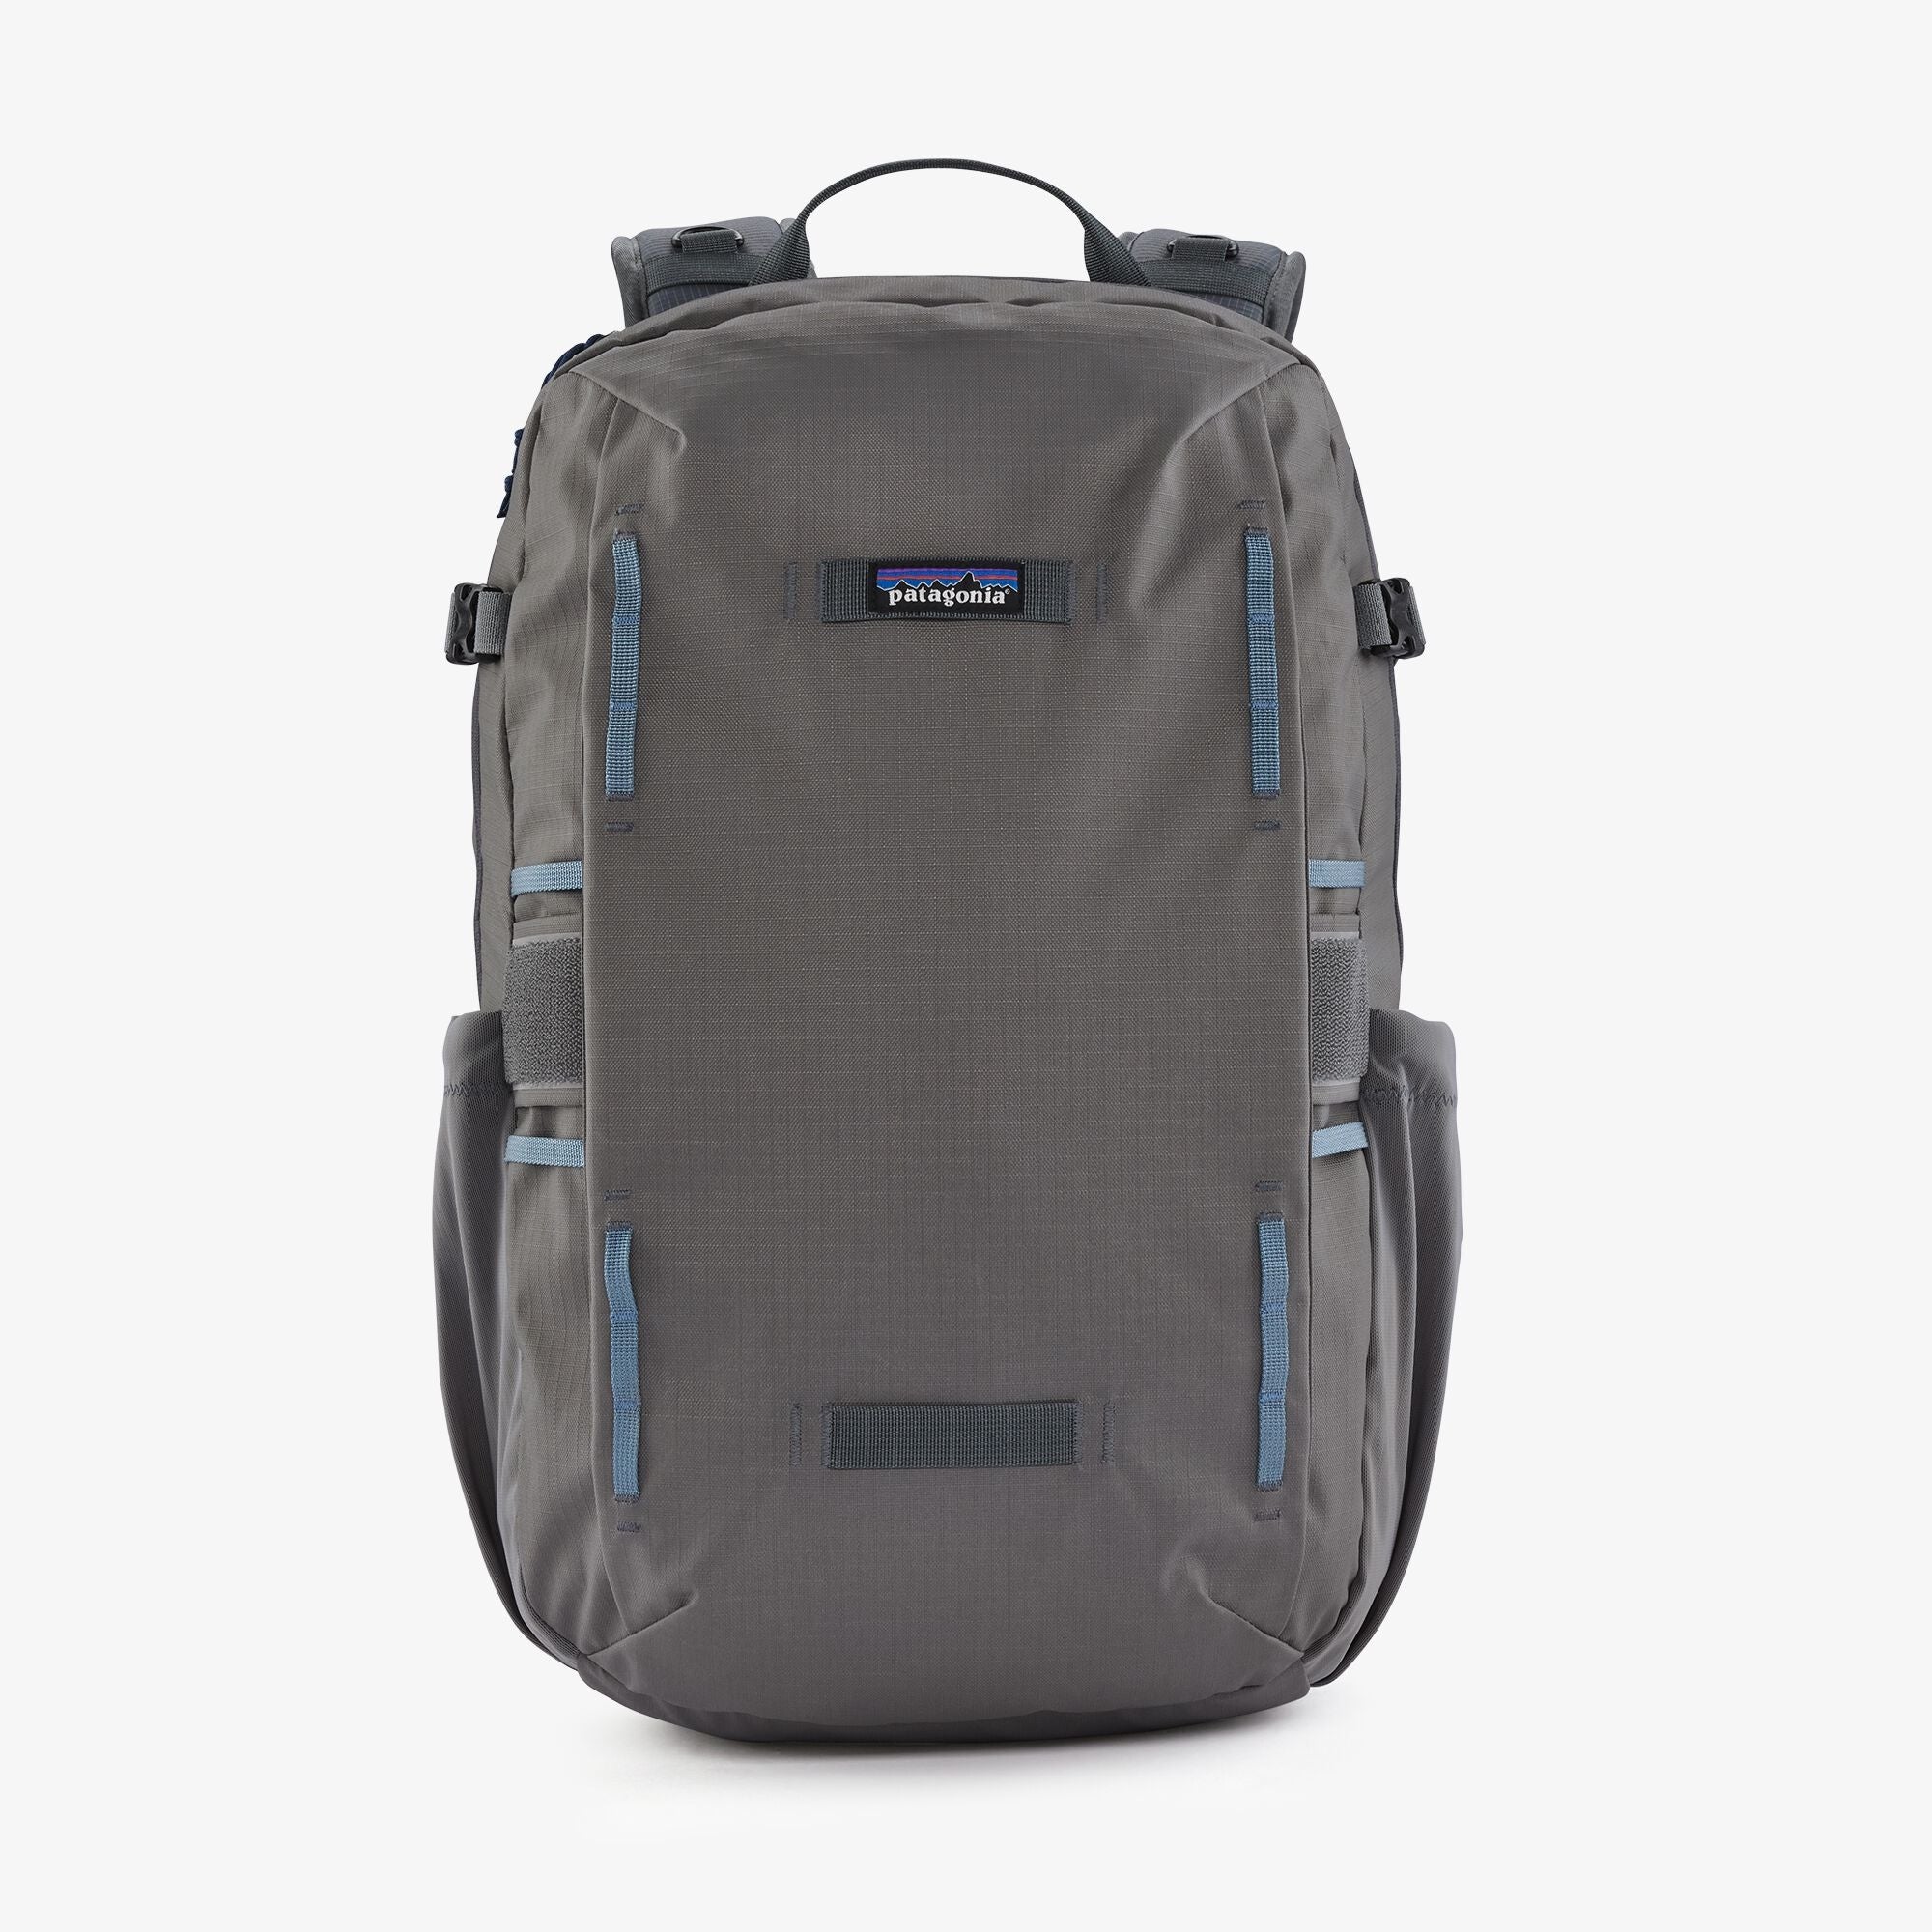 Stealth Pack - ( Patagonia) - Blue Quill Angler